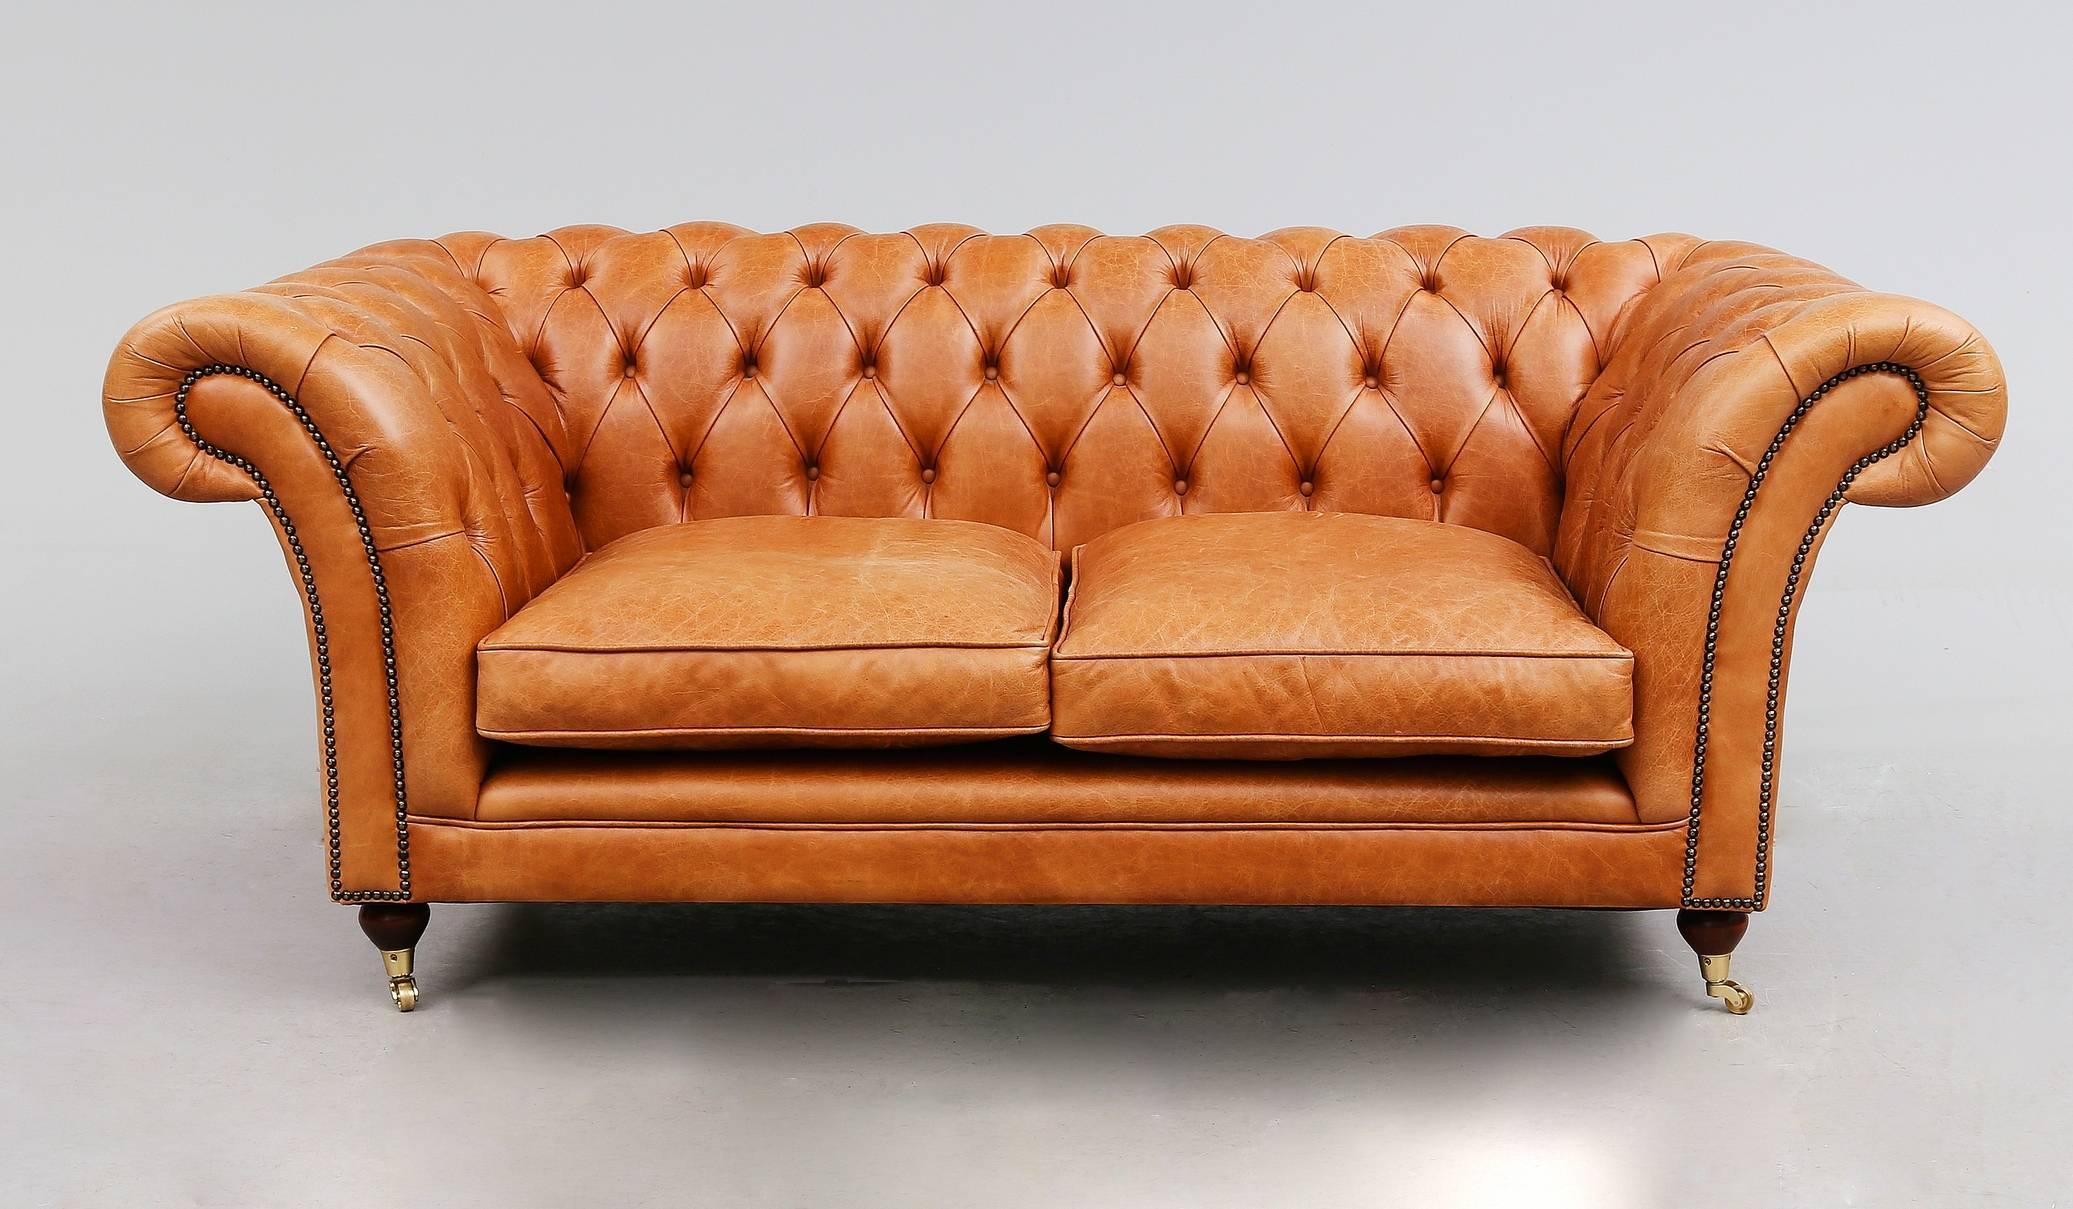 European Light Brown Leather Chesterfield Sofa